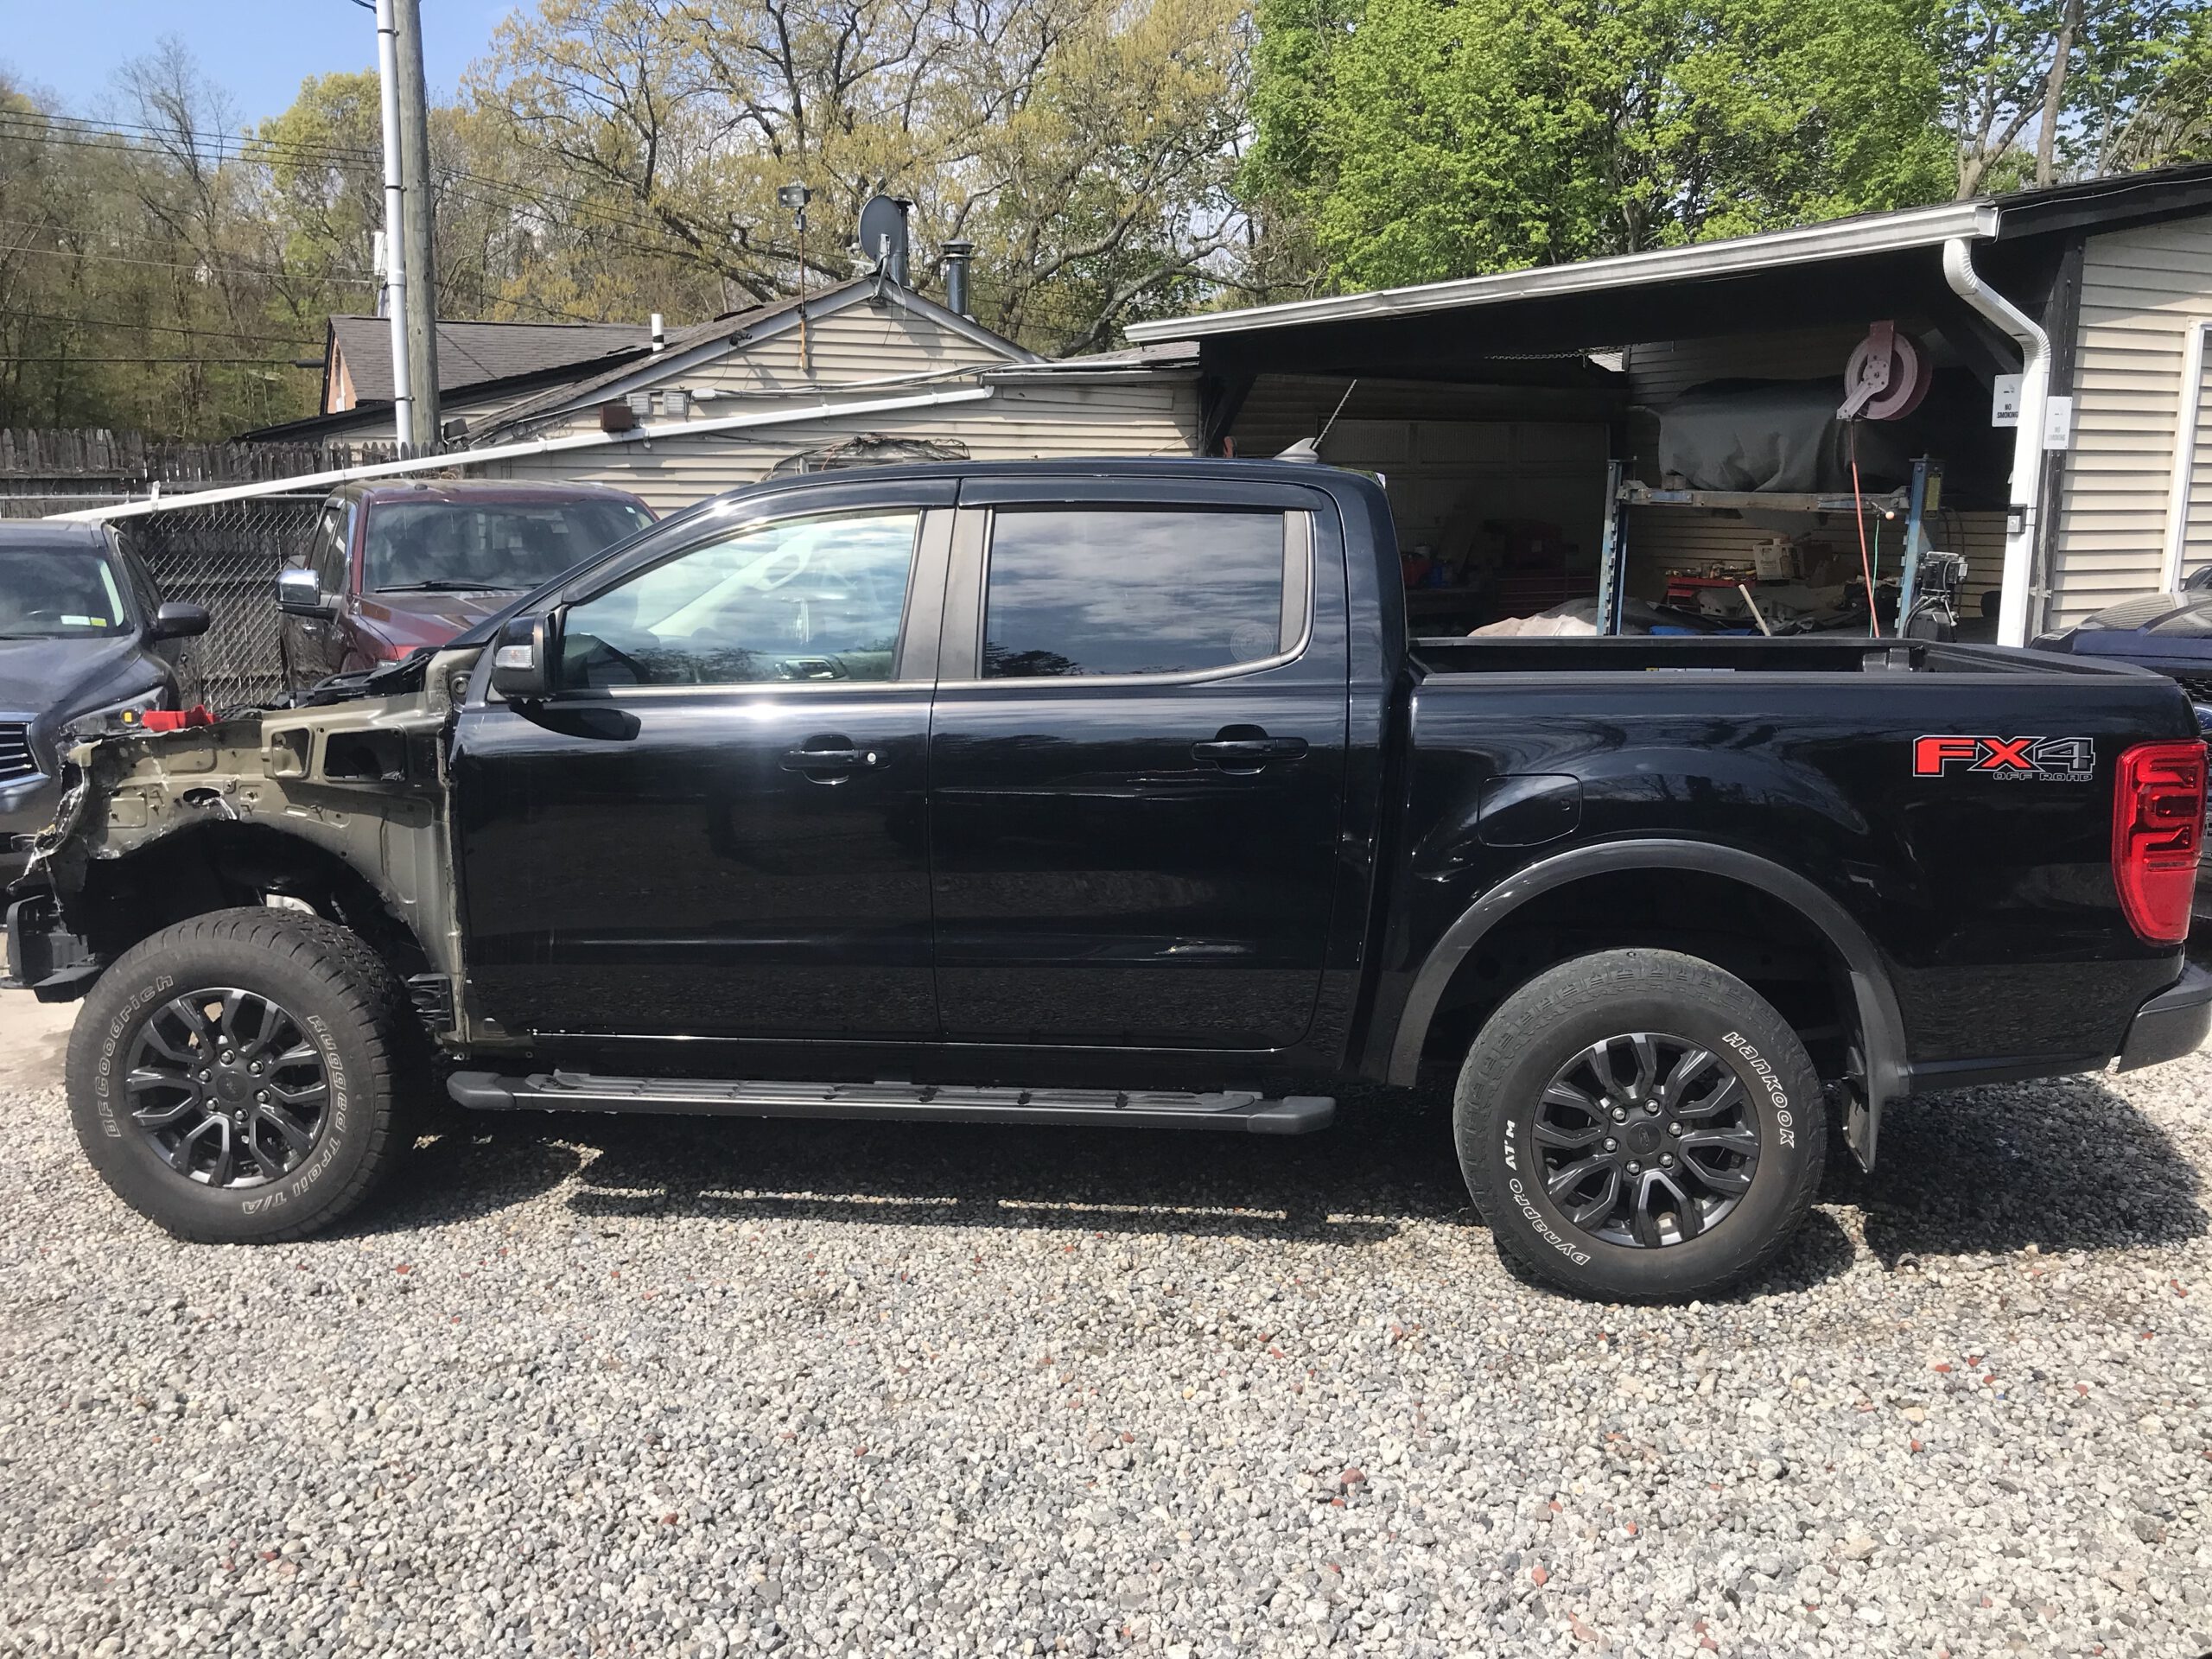 2019 Ford Ranger Lariat 4dr, 4×4, loaded, leather,  53K, front damage.   RUNS AND DRIVES. Good airbags. $15,999. full